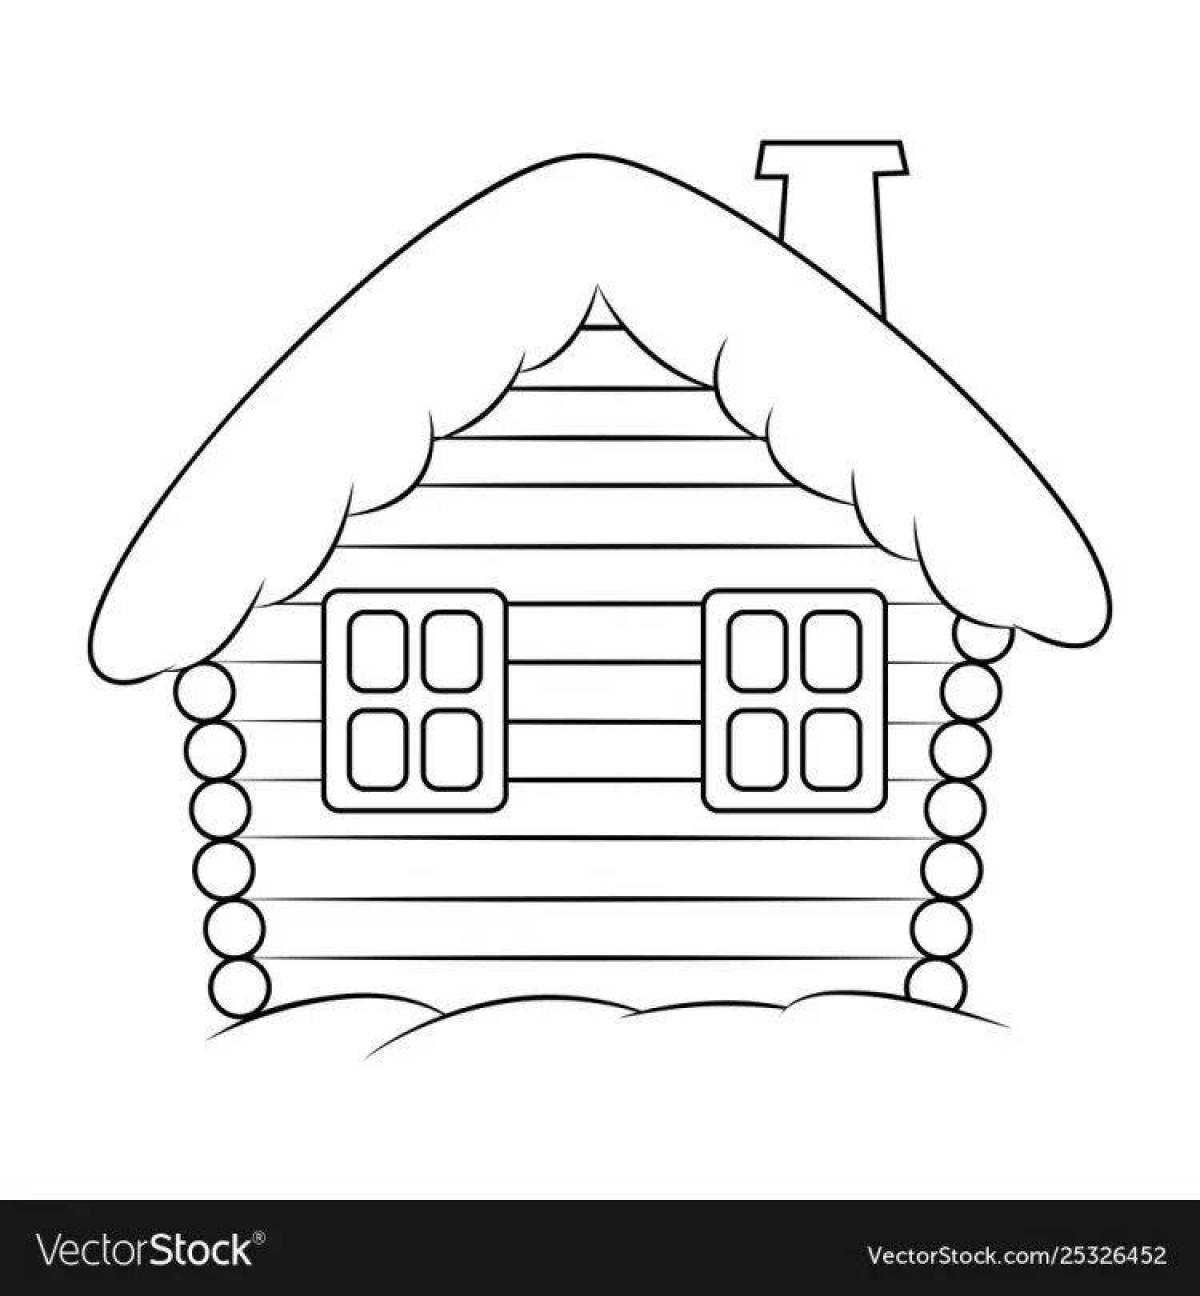 Coloring page snowy winter hut